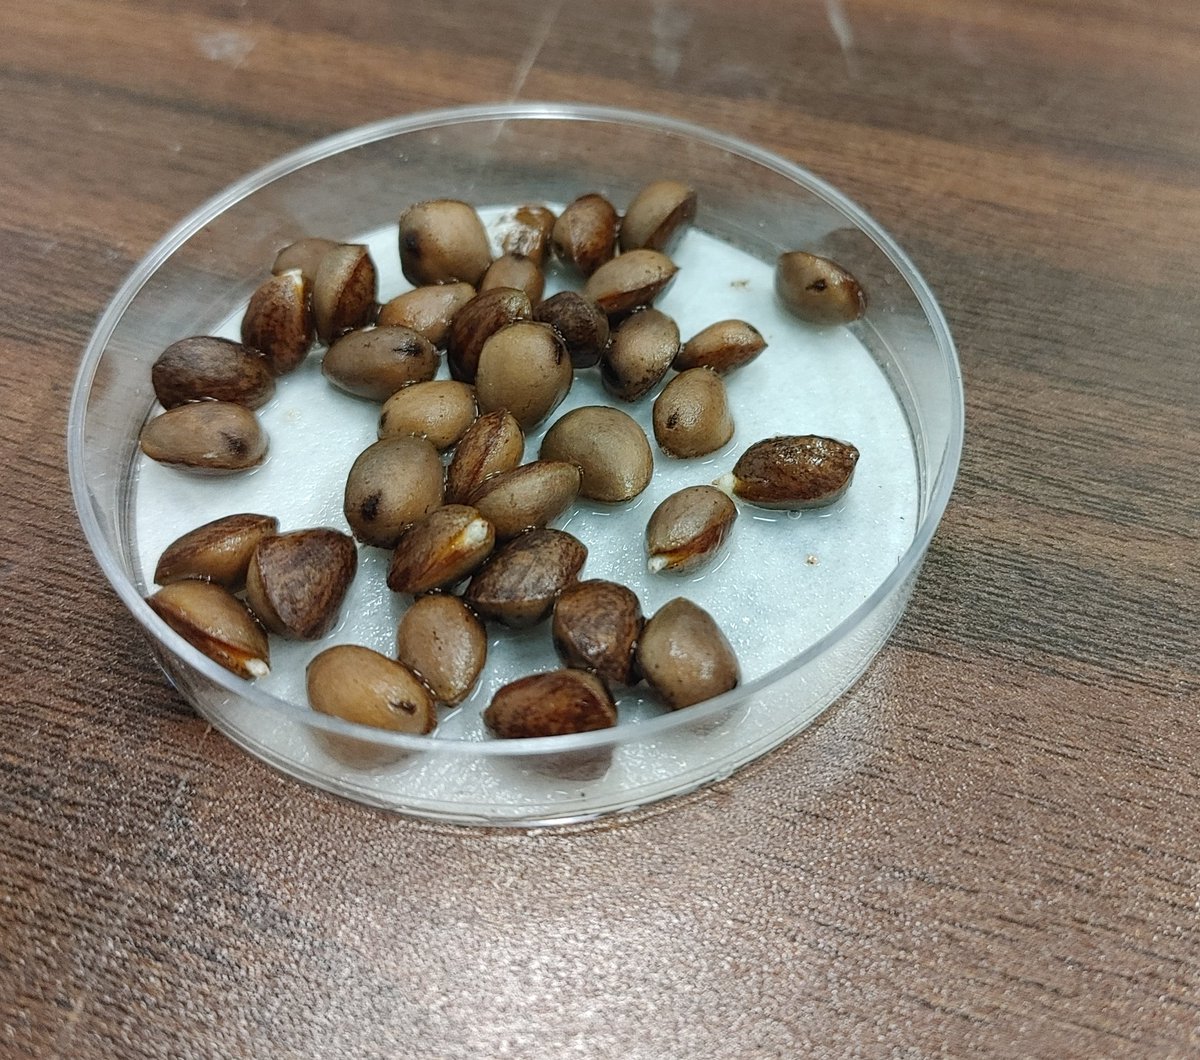 These limber pine seeds came from trees just below the Rainbow Curve Overlook in Rocky Mountain NP. I have about 40,000 of them germinating in ~1,000 petri dishes. I'll plant ~3,000 from all three study sites representing trees from the krummholz treeline into subalpine forest.